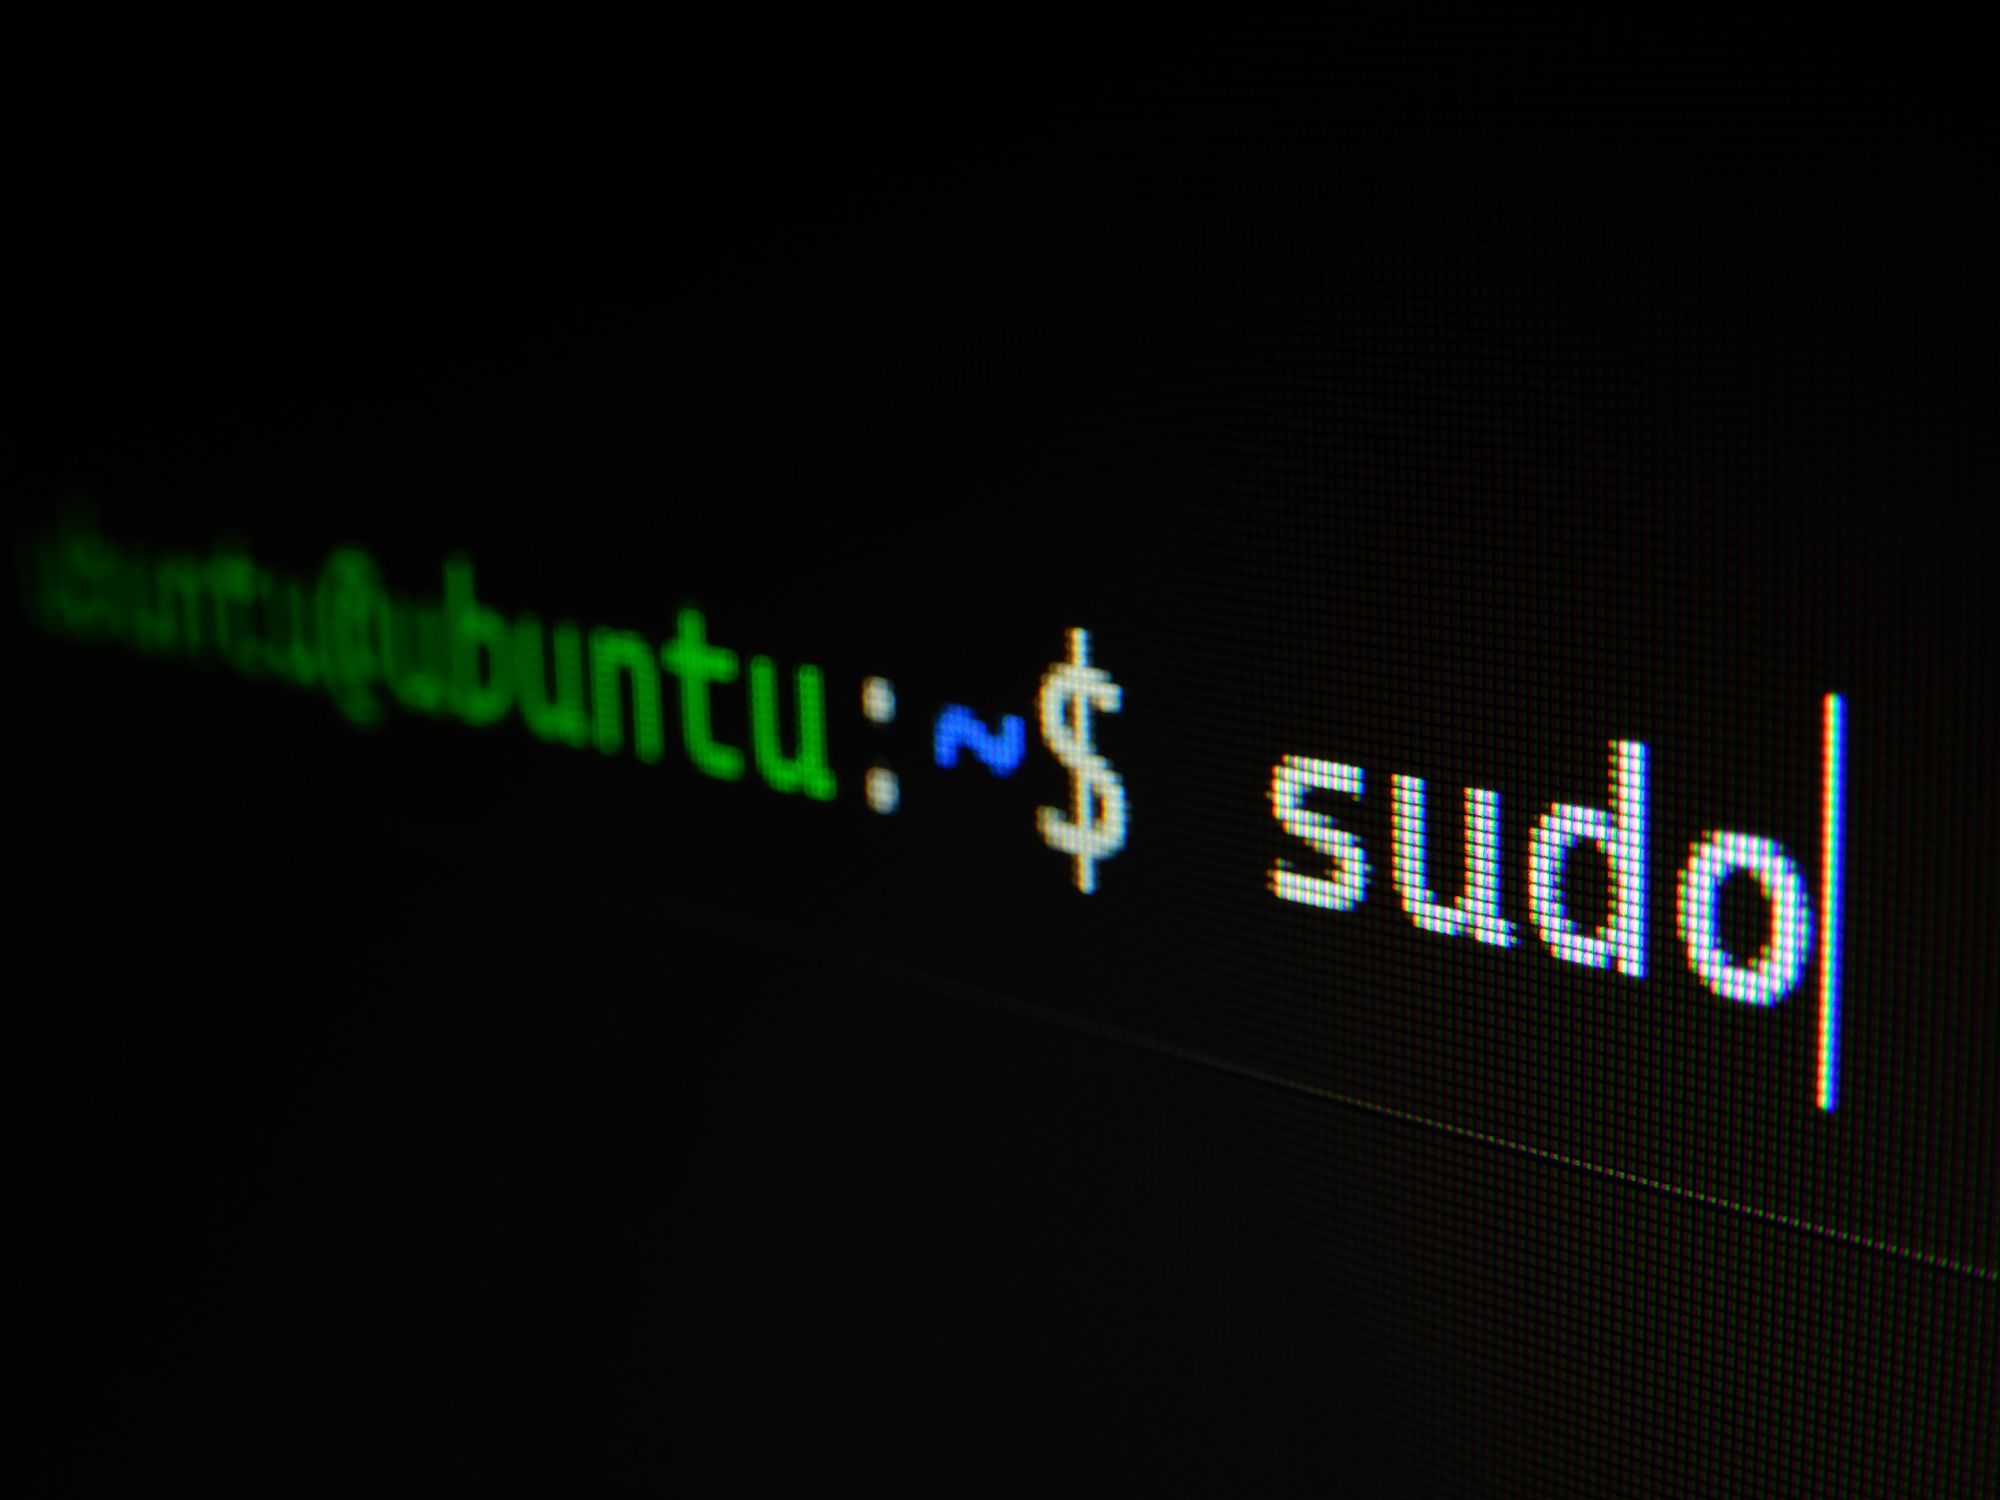 sudo apt-get update vs upgrade – What is the Difference?